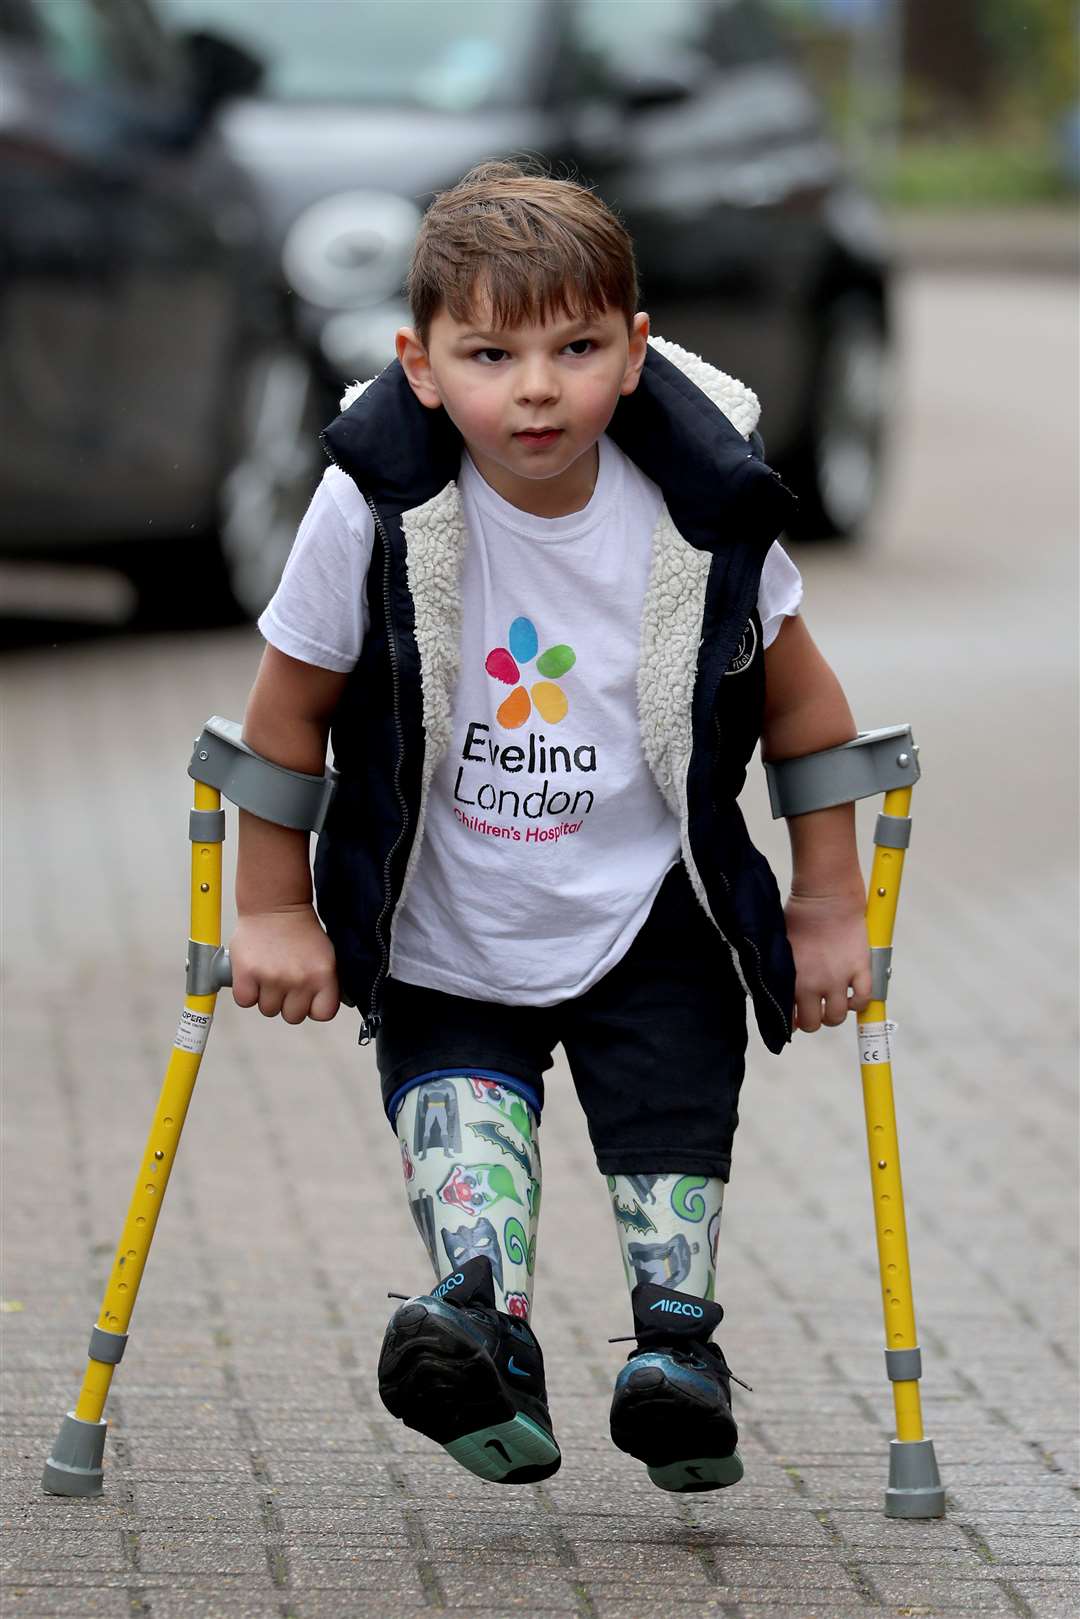 Tony Hudgell, then aged just five, takes the final steps in his walk that raised more than £1 million for the hospital which has cared for him since he was four-months-old (Gareth Fuller/PA Wire)